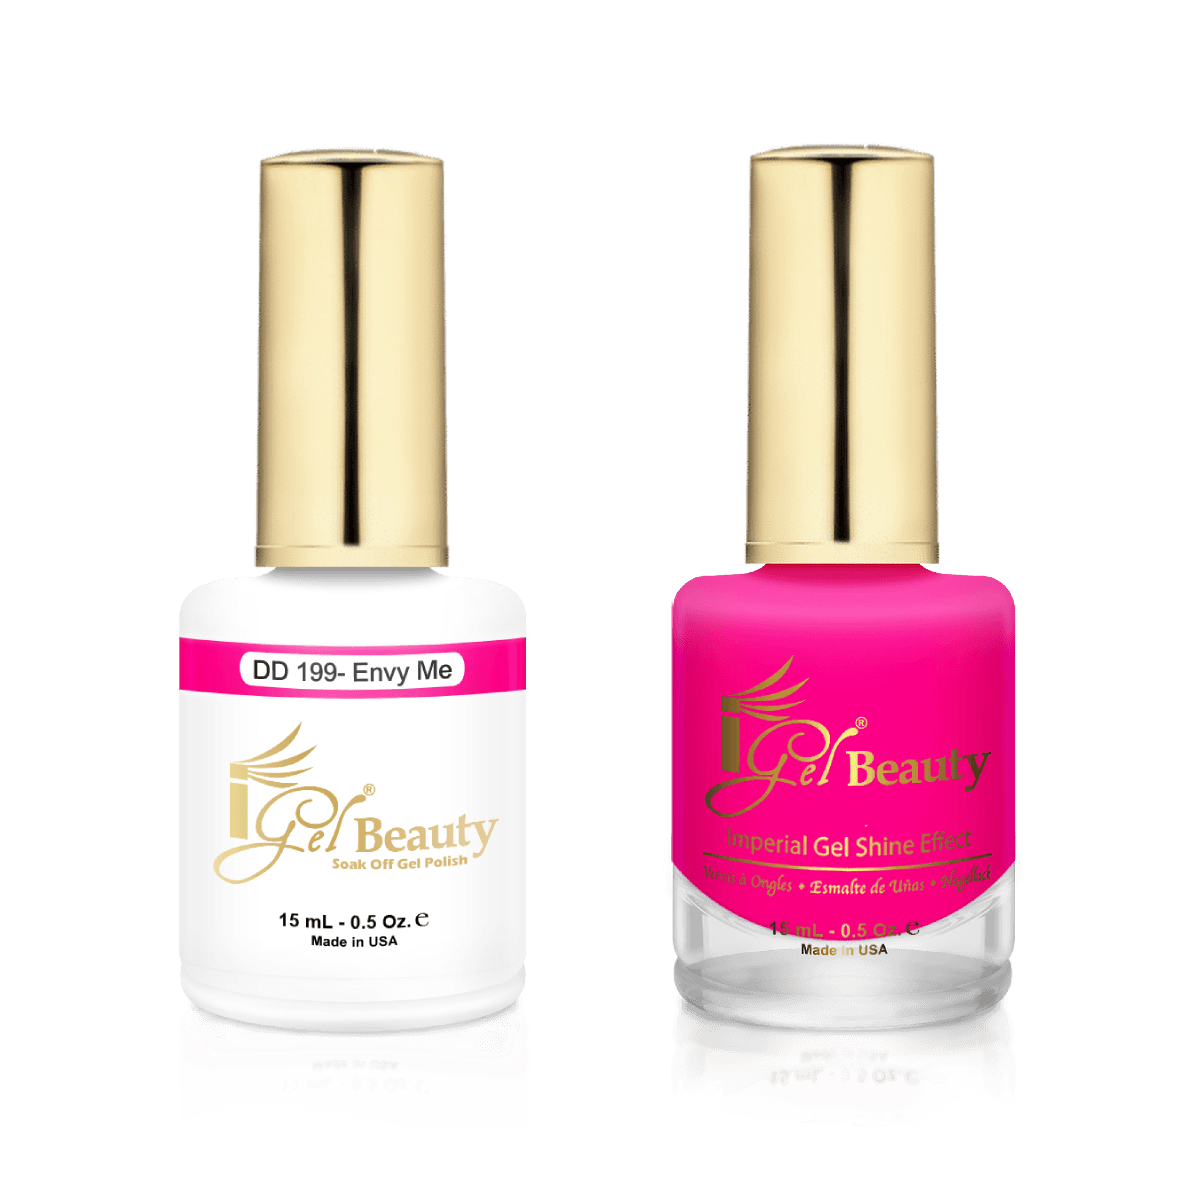 IGel Duo Gel Polish + Matching Nail Lacquer DD 199 ENVY ME